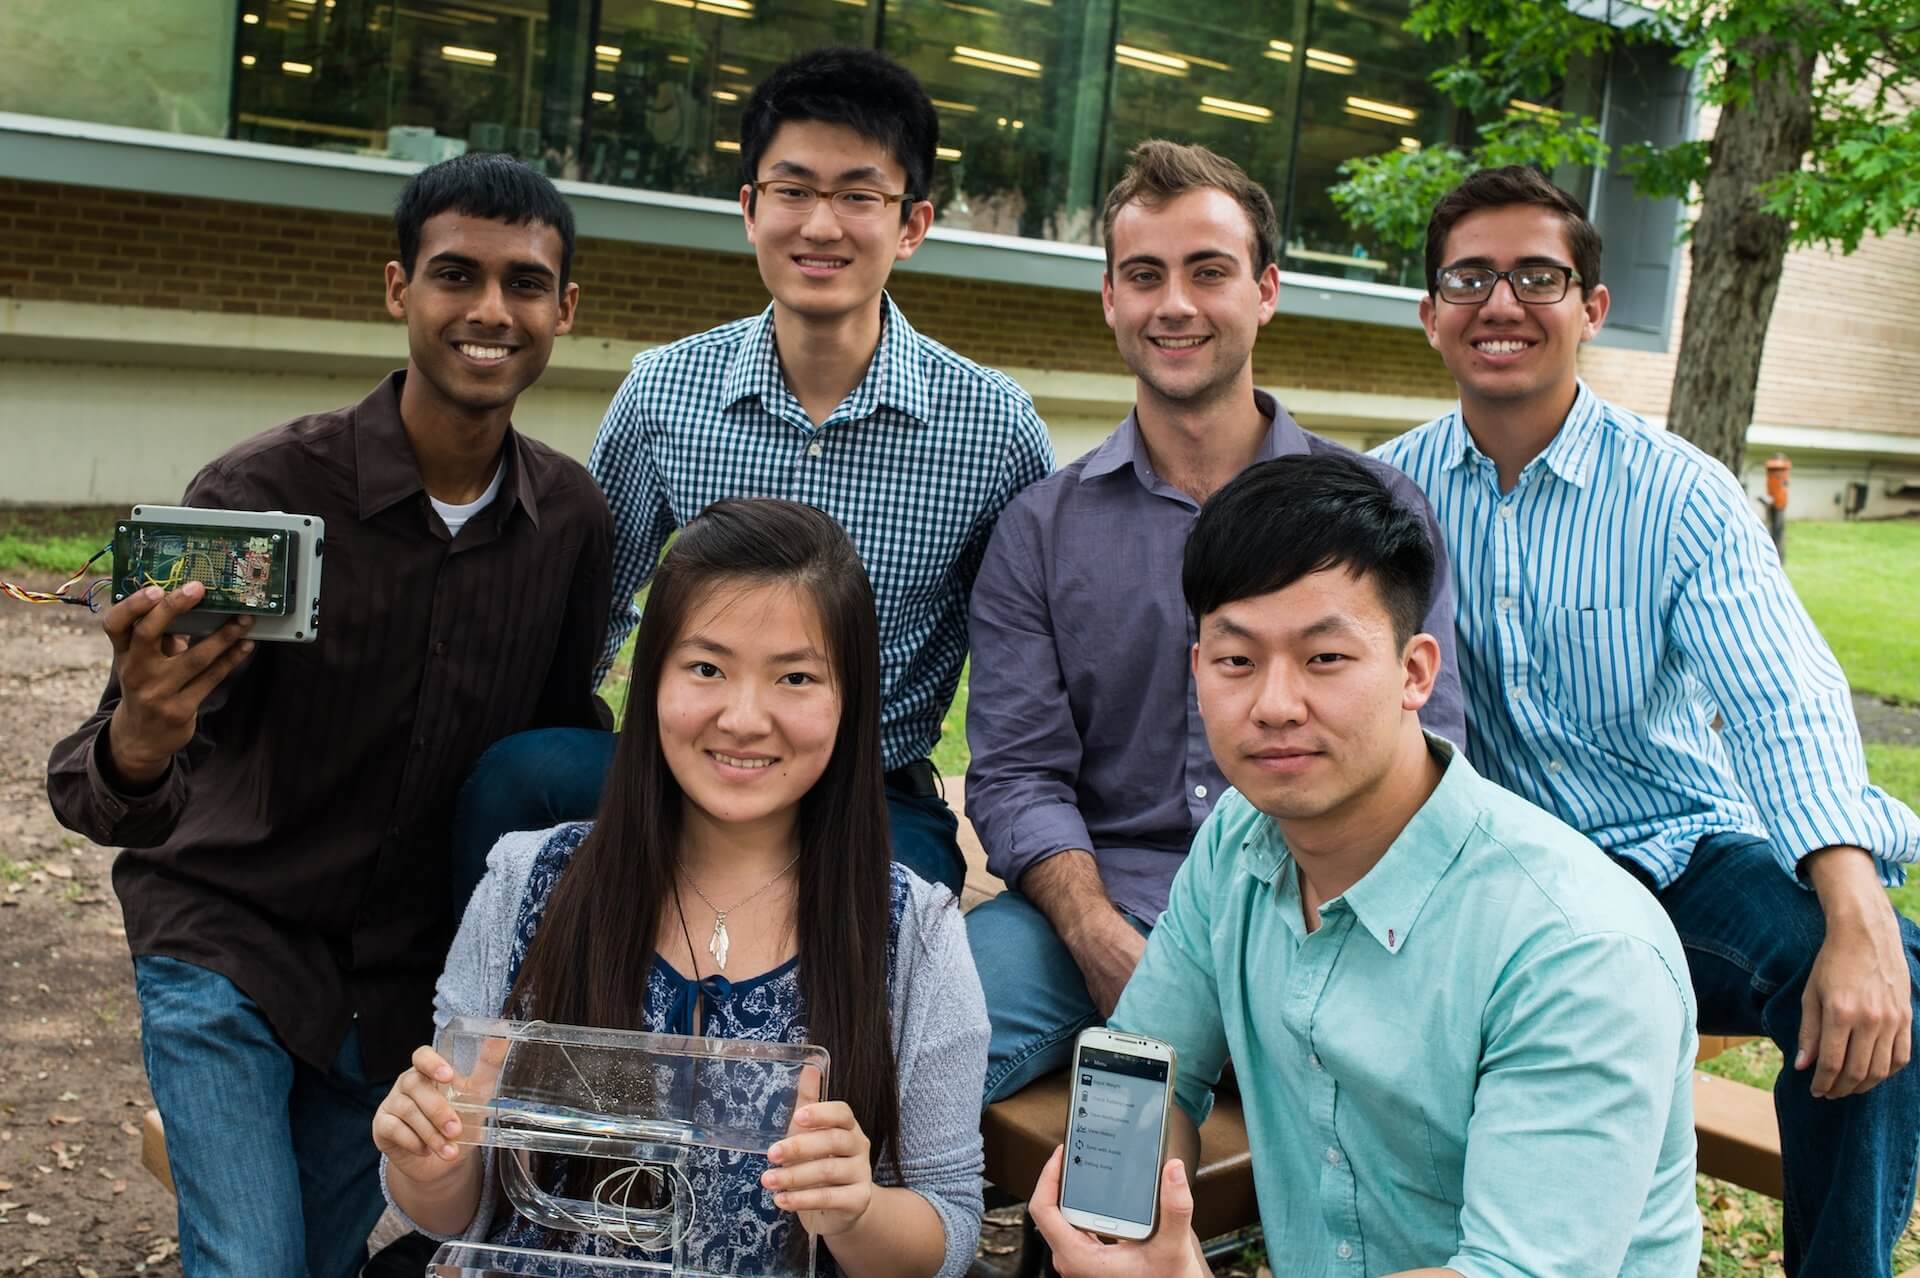 The Flowtastic team of Rice University engineering students created an app and hardware to help control a unique heart assist pump. Members are, standing from left, Navaneeth Ravindranath, Ernest Chan, Alex Bisberg and Benjamin Lopez, and seated, Tracy Fu and Joshua Choi. (Credit: Jeff Fitlow/Rice University)